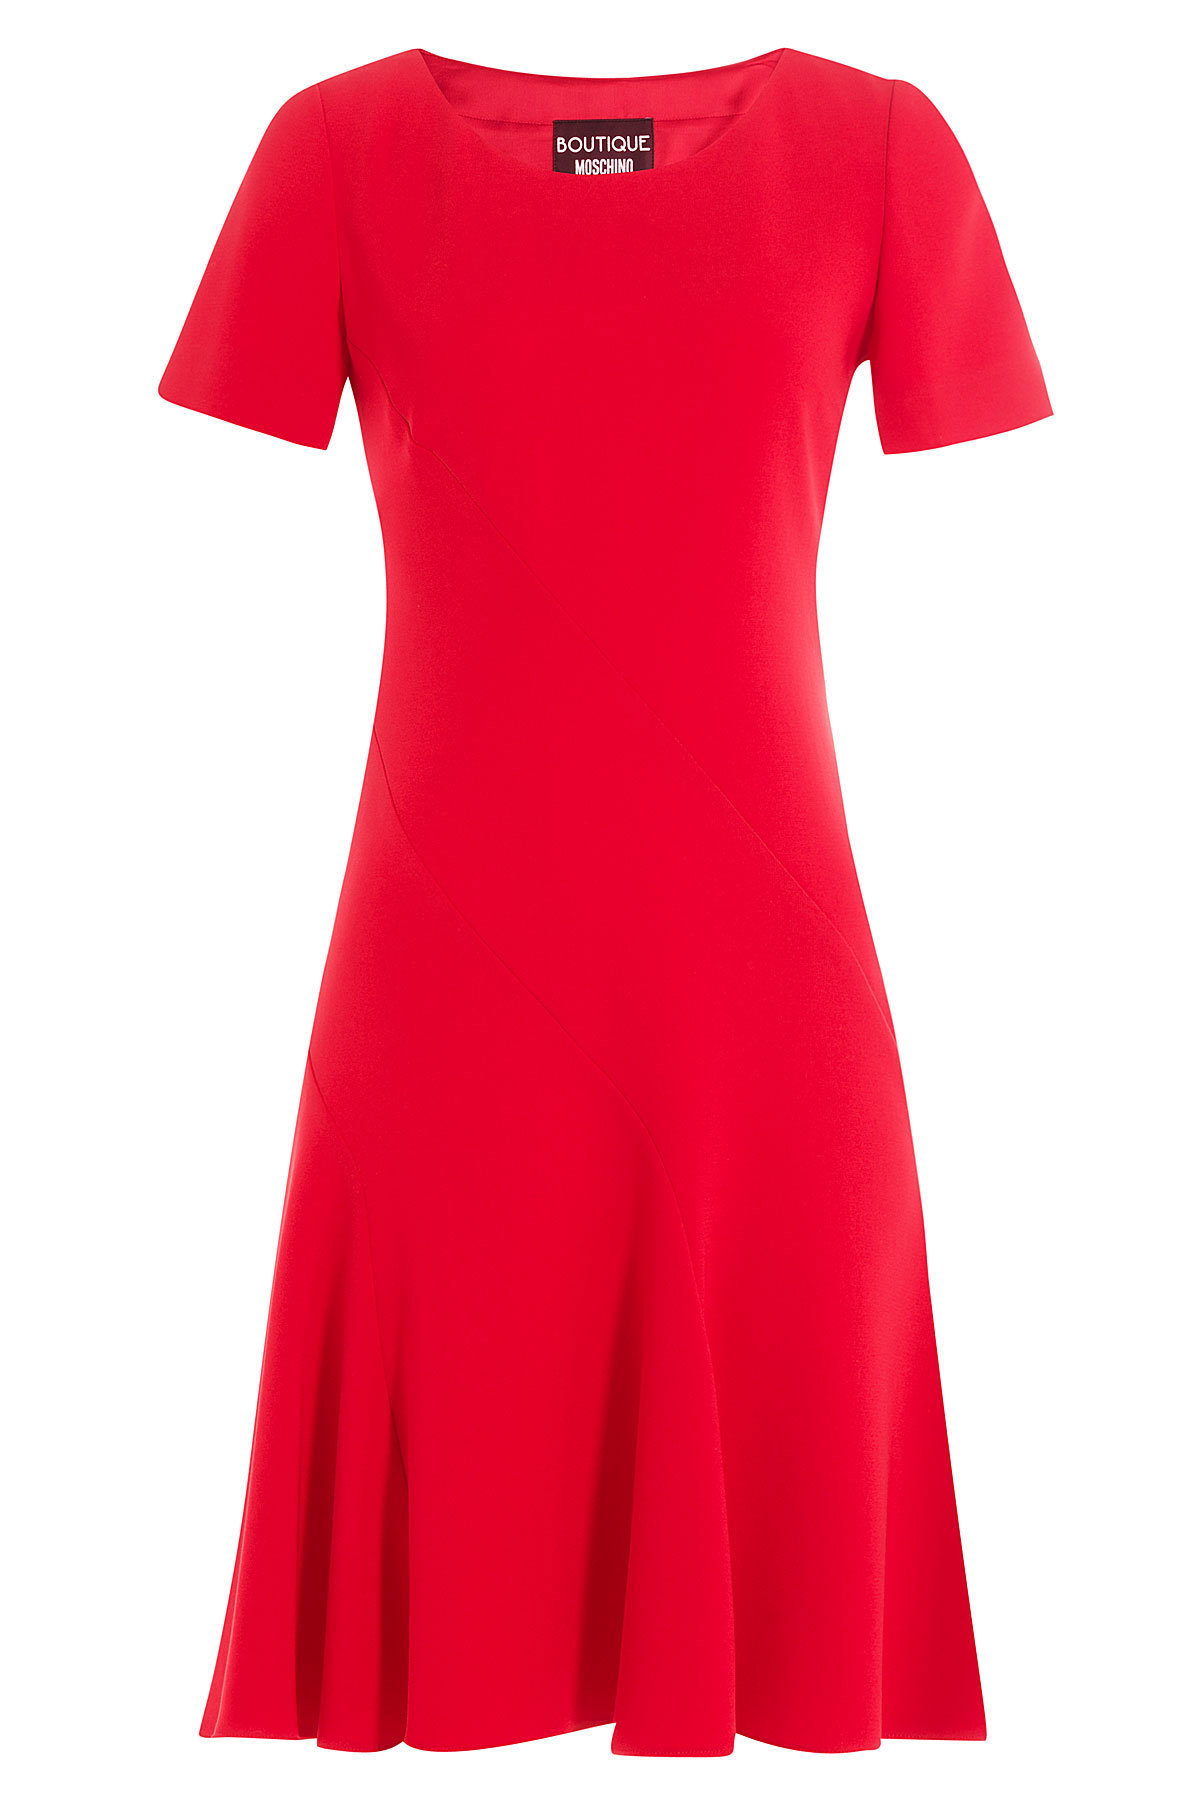 Boutique Moschino - Dress with Flared Skirt